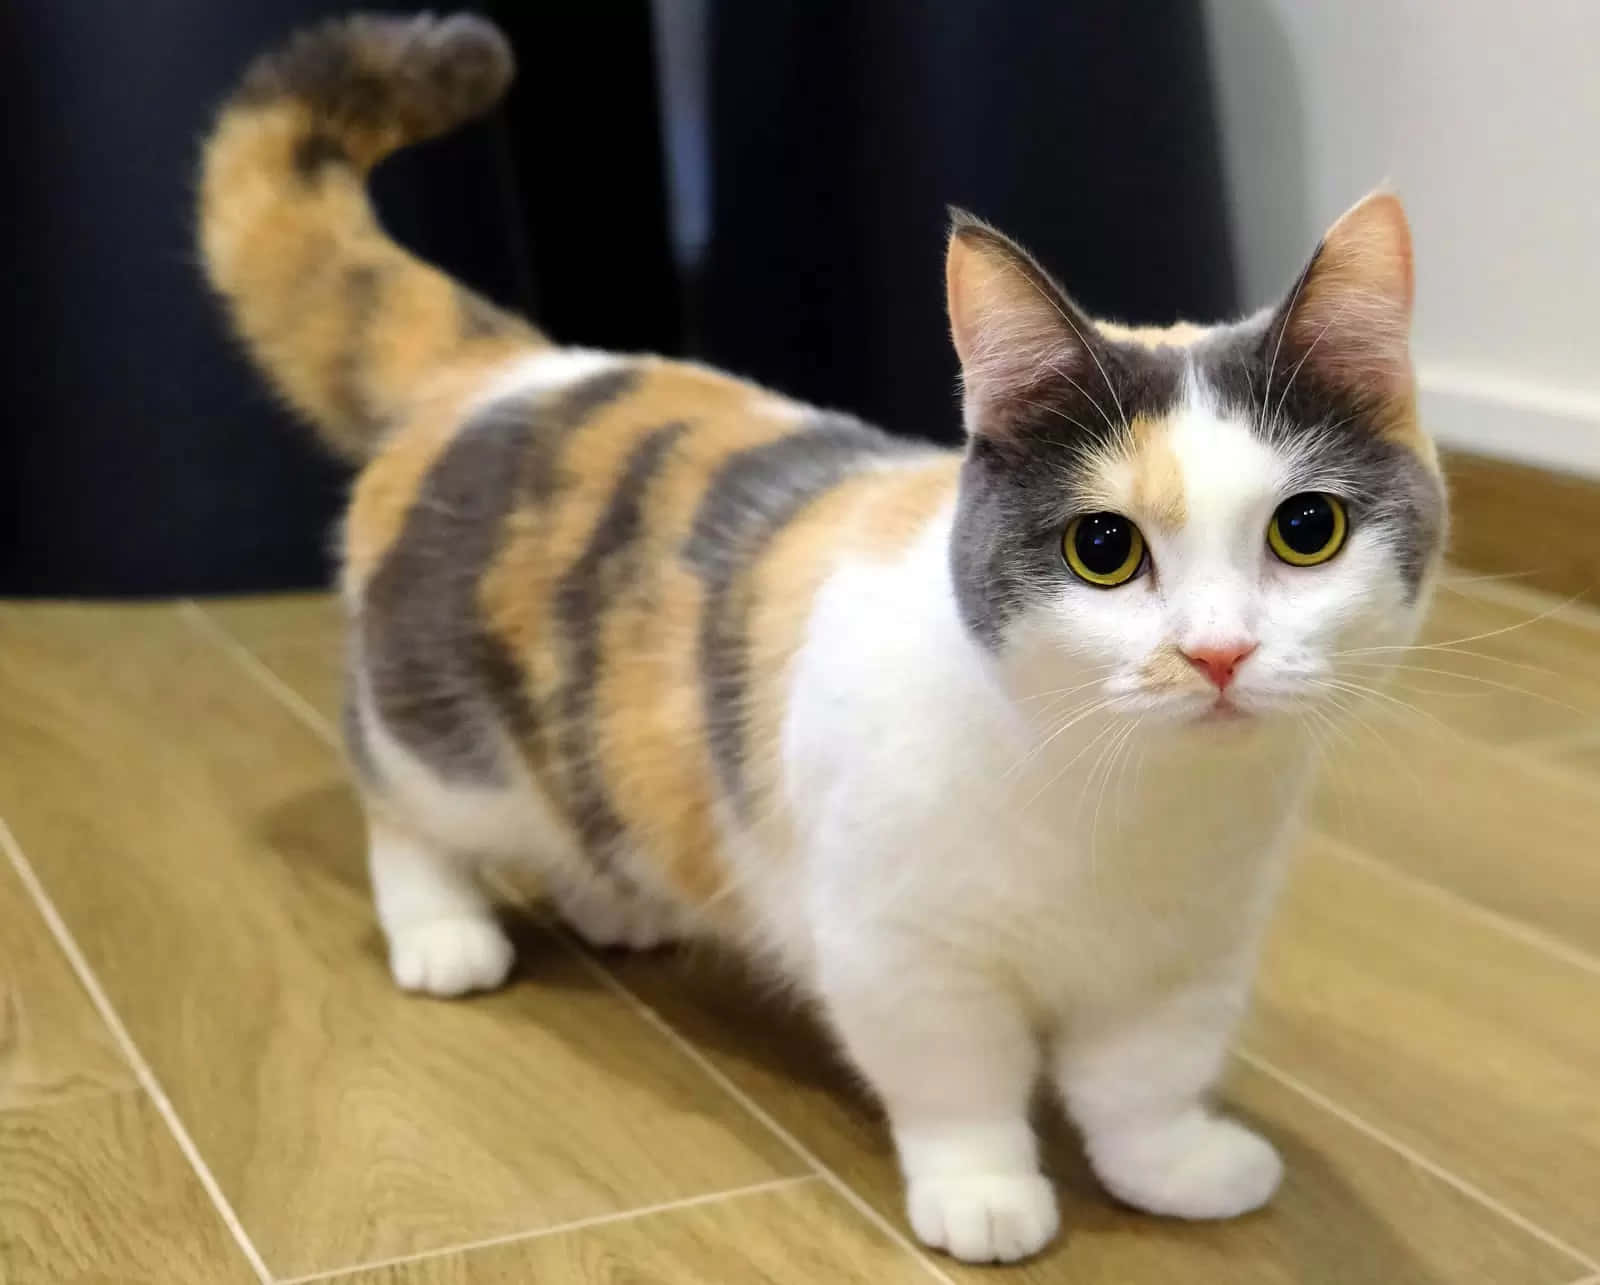 Adorable Munchkin Cat in Playful Stance Wallpaper